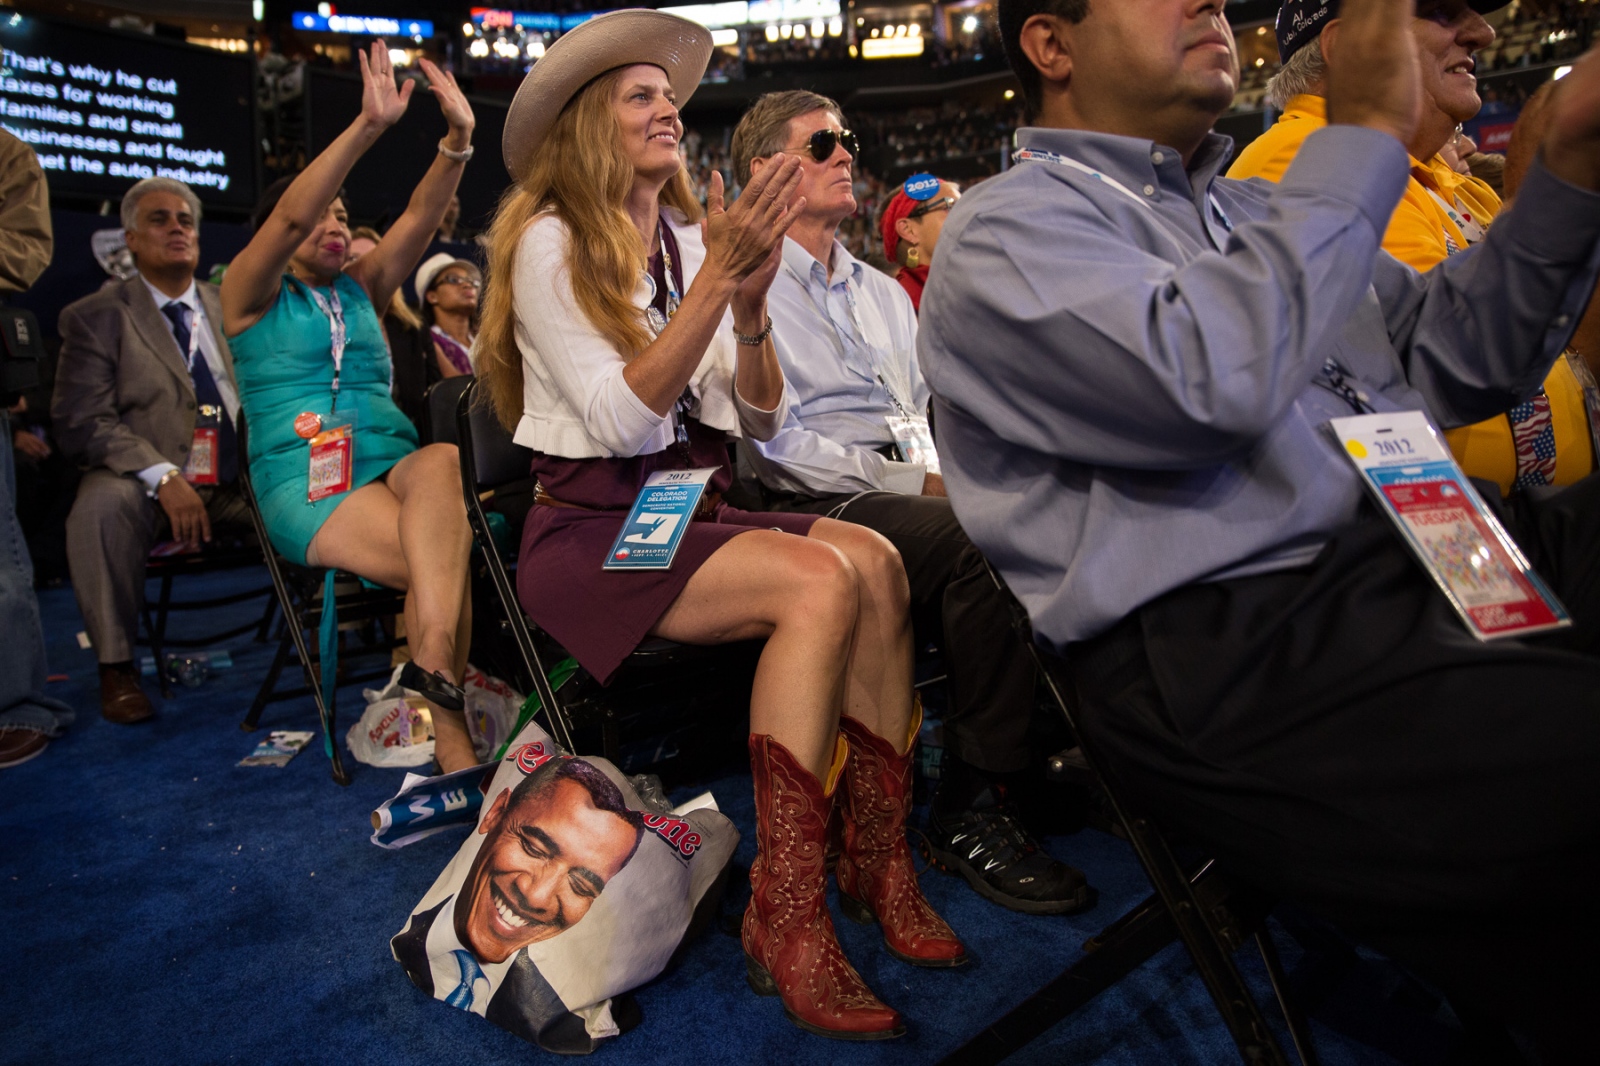 The Political Theater Of The Absurd - The Democratic National Convention (DNC) in Charlotte,...